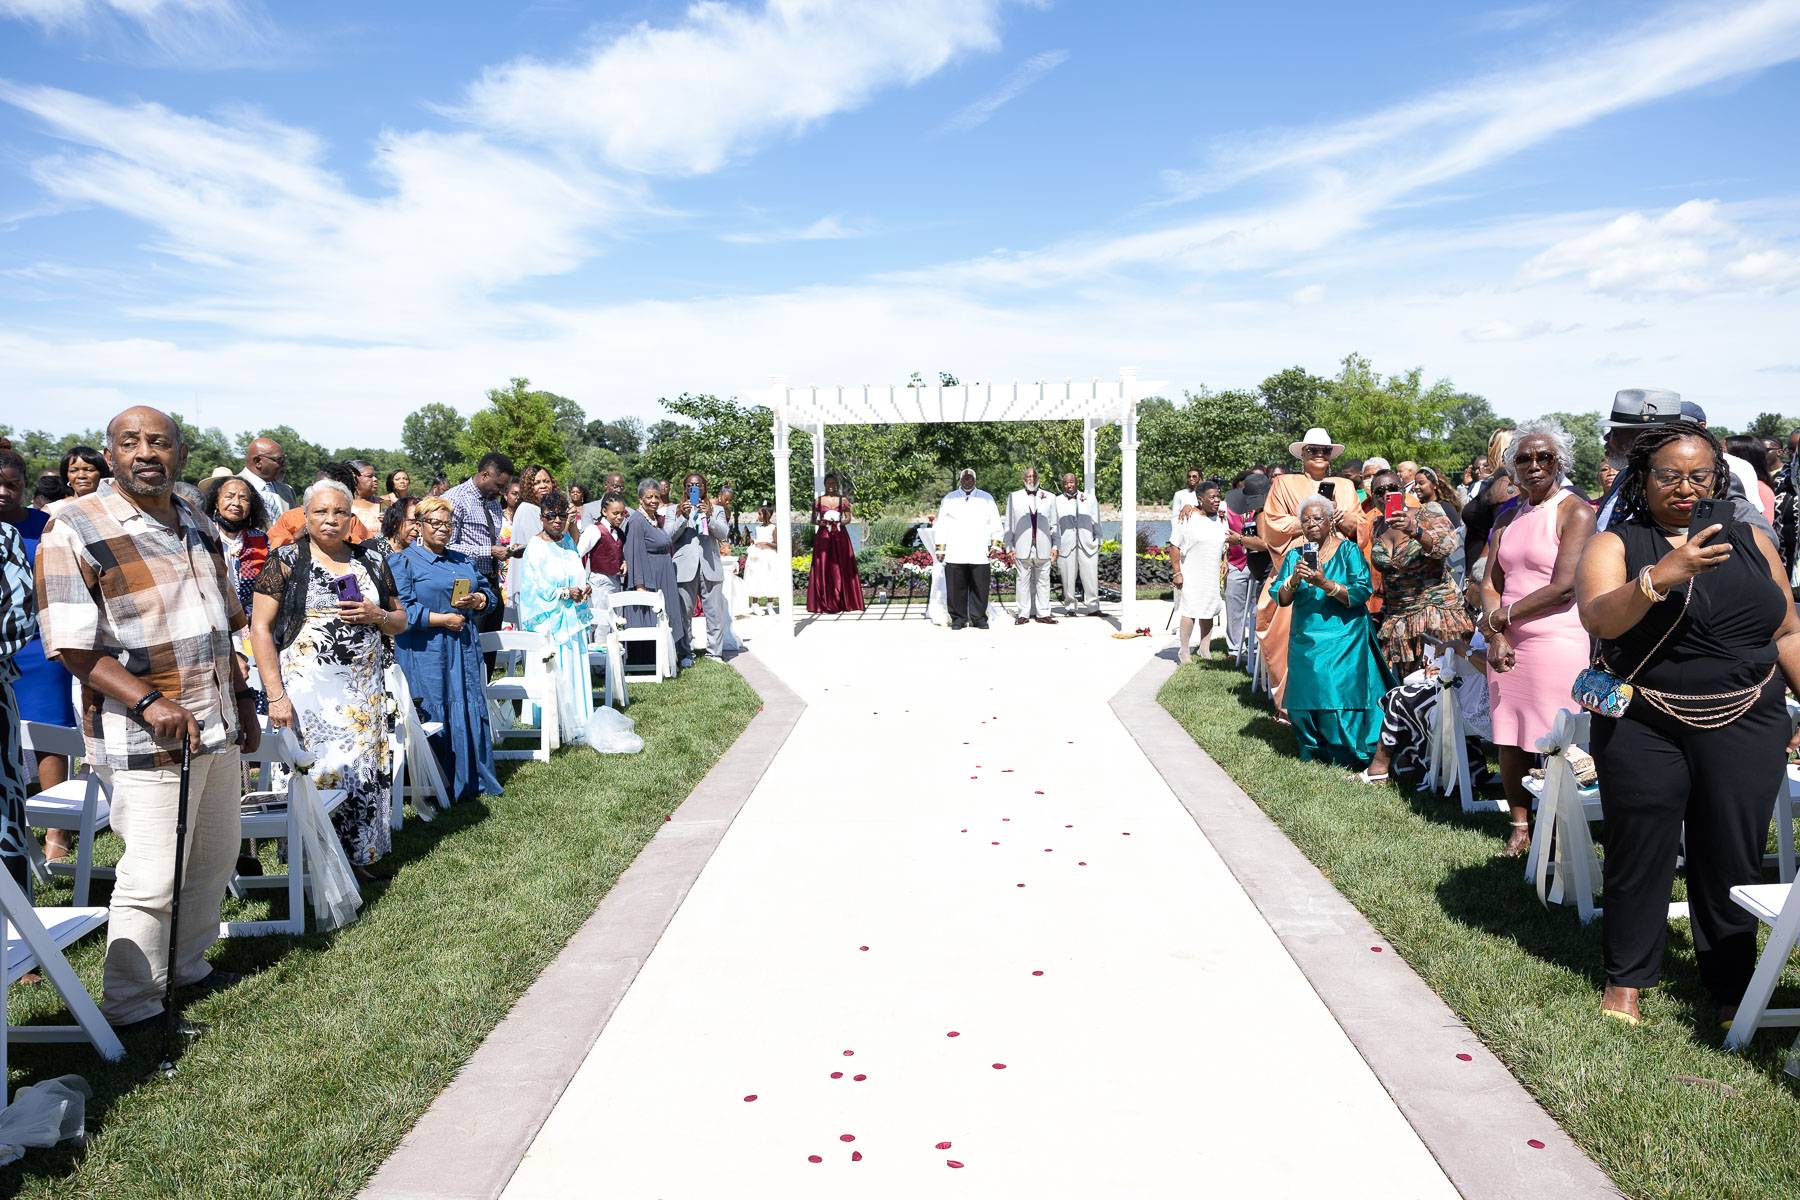 A white canopy and carpet for the wedding